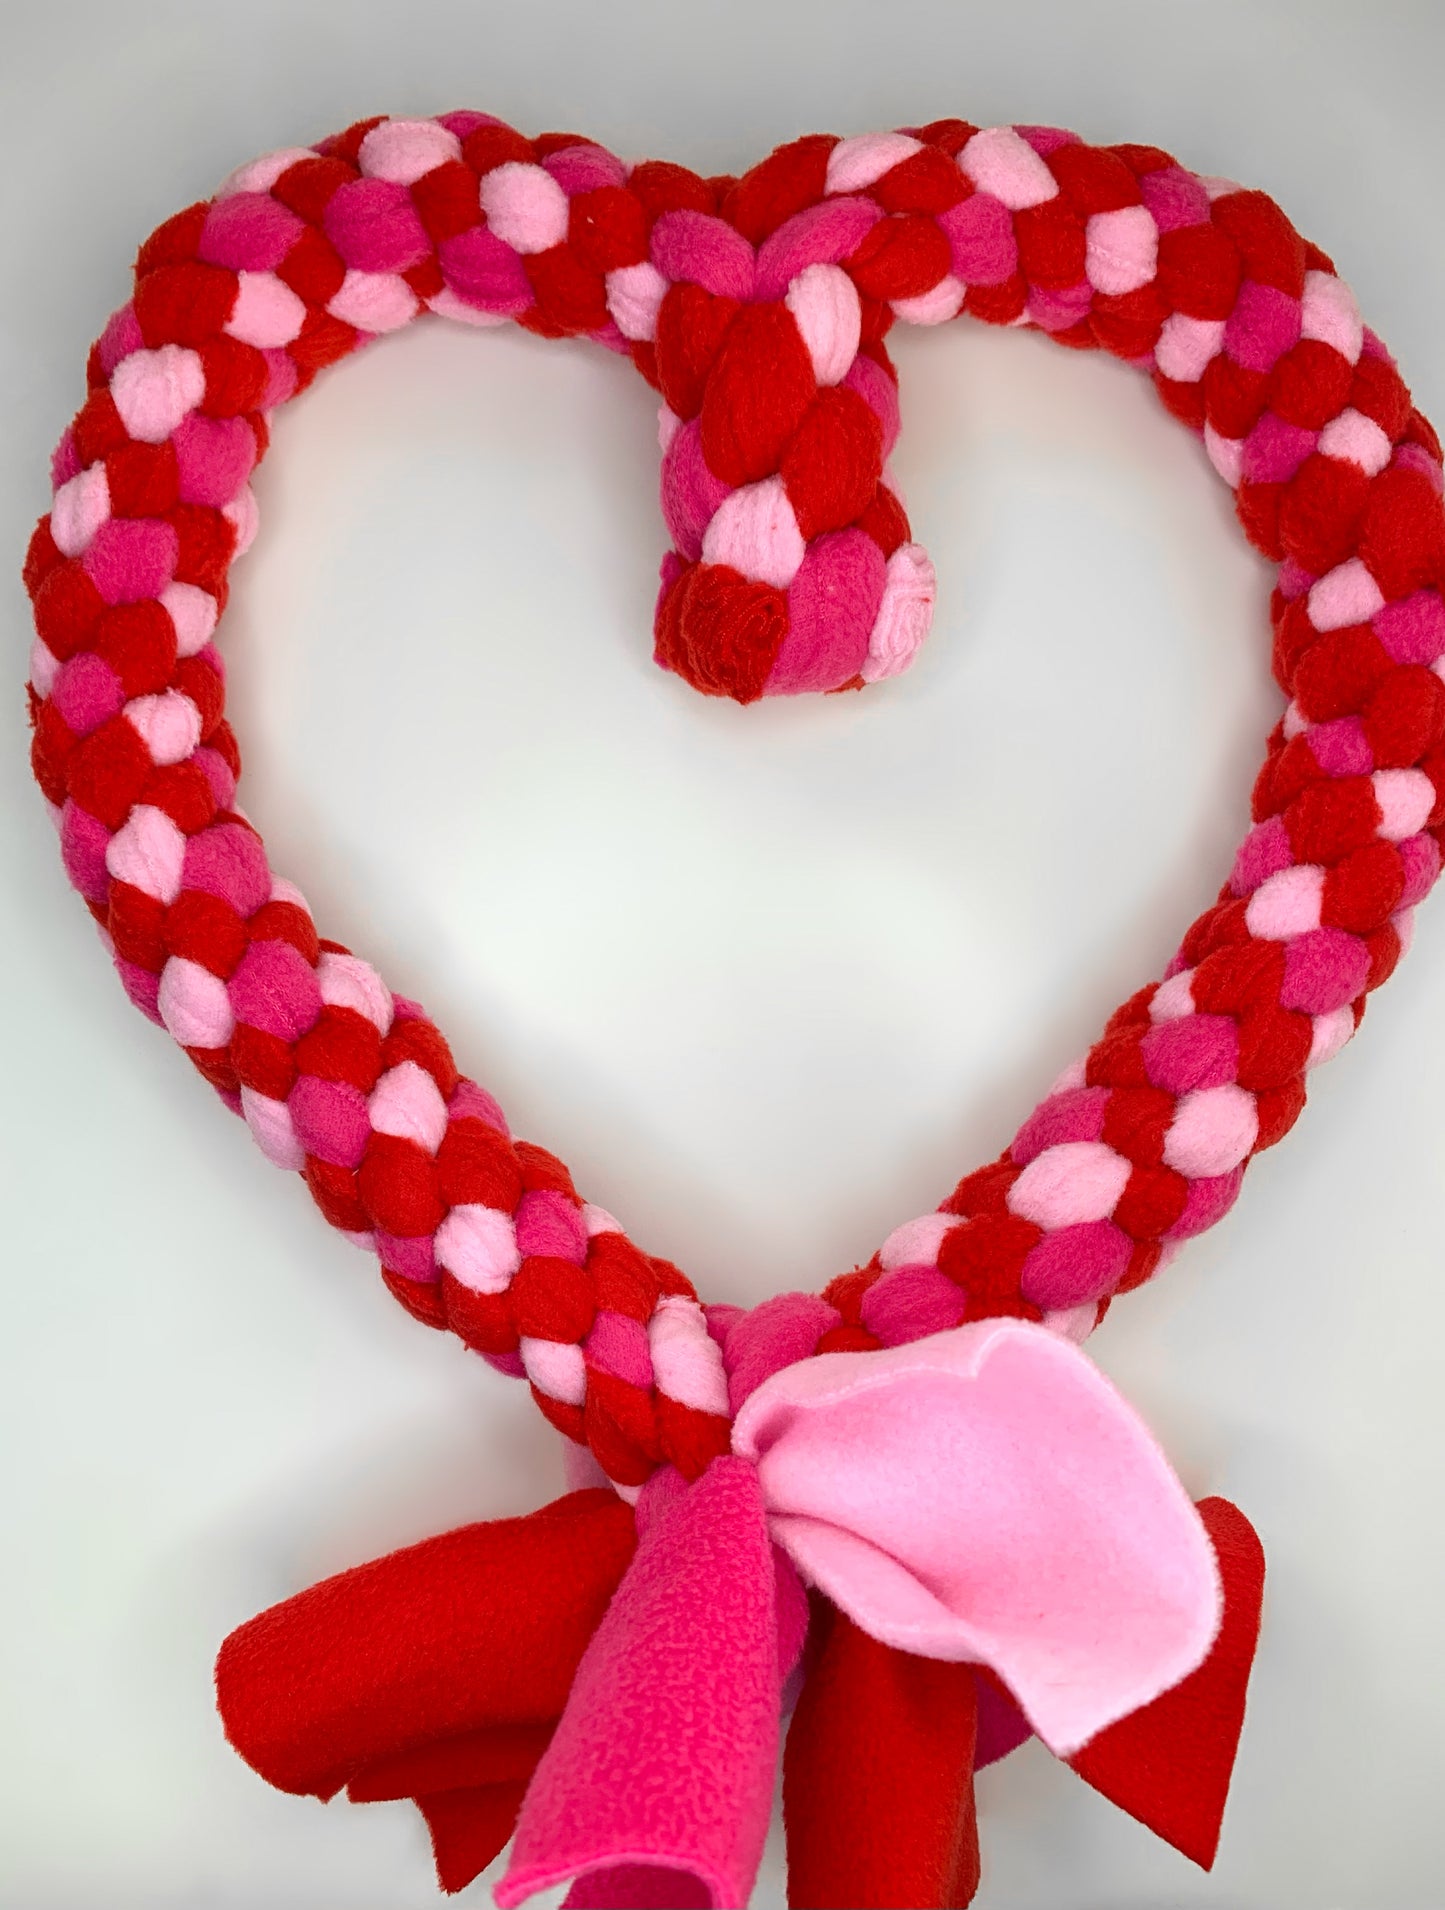 Large Love Heart Tug Toy